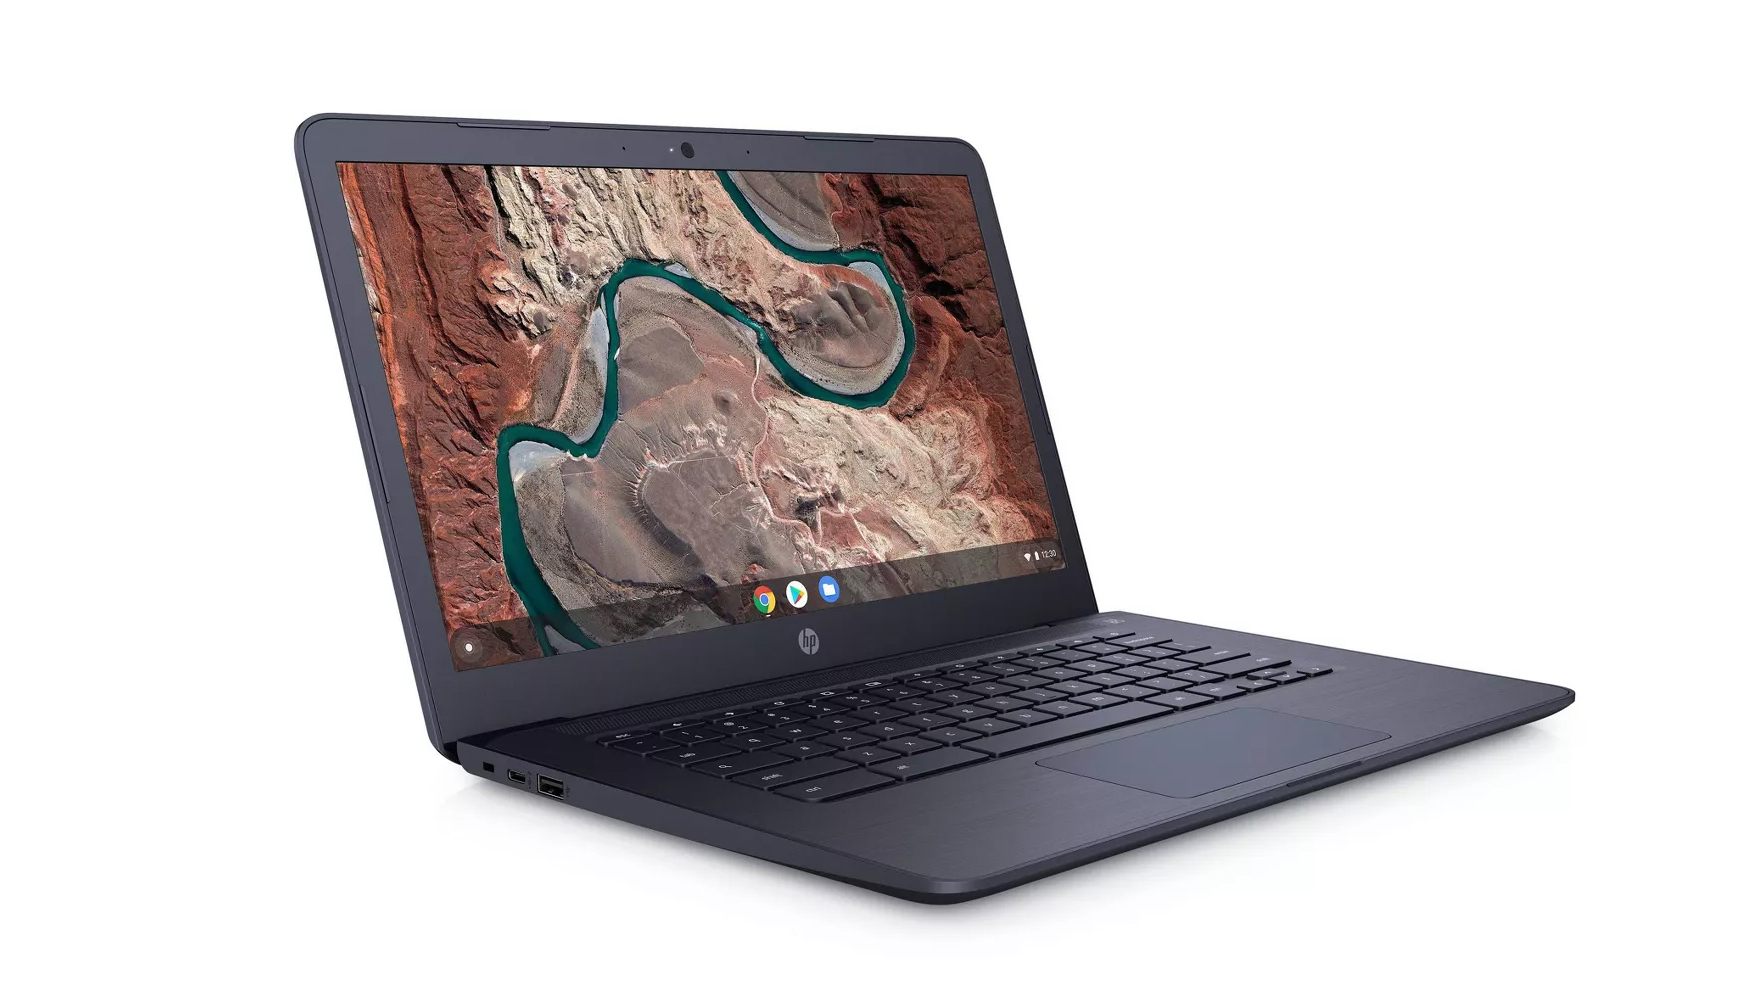 The HP Chromebook 14 against a white background